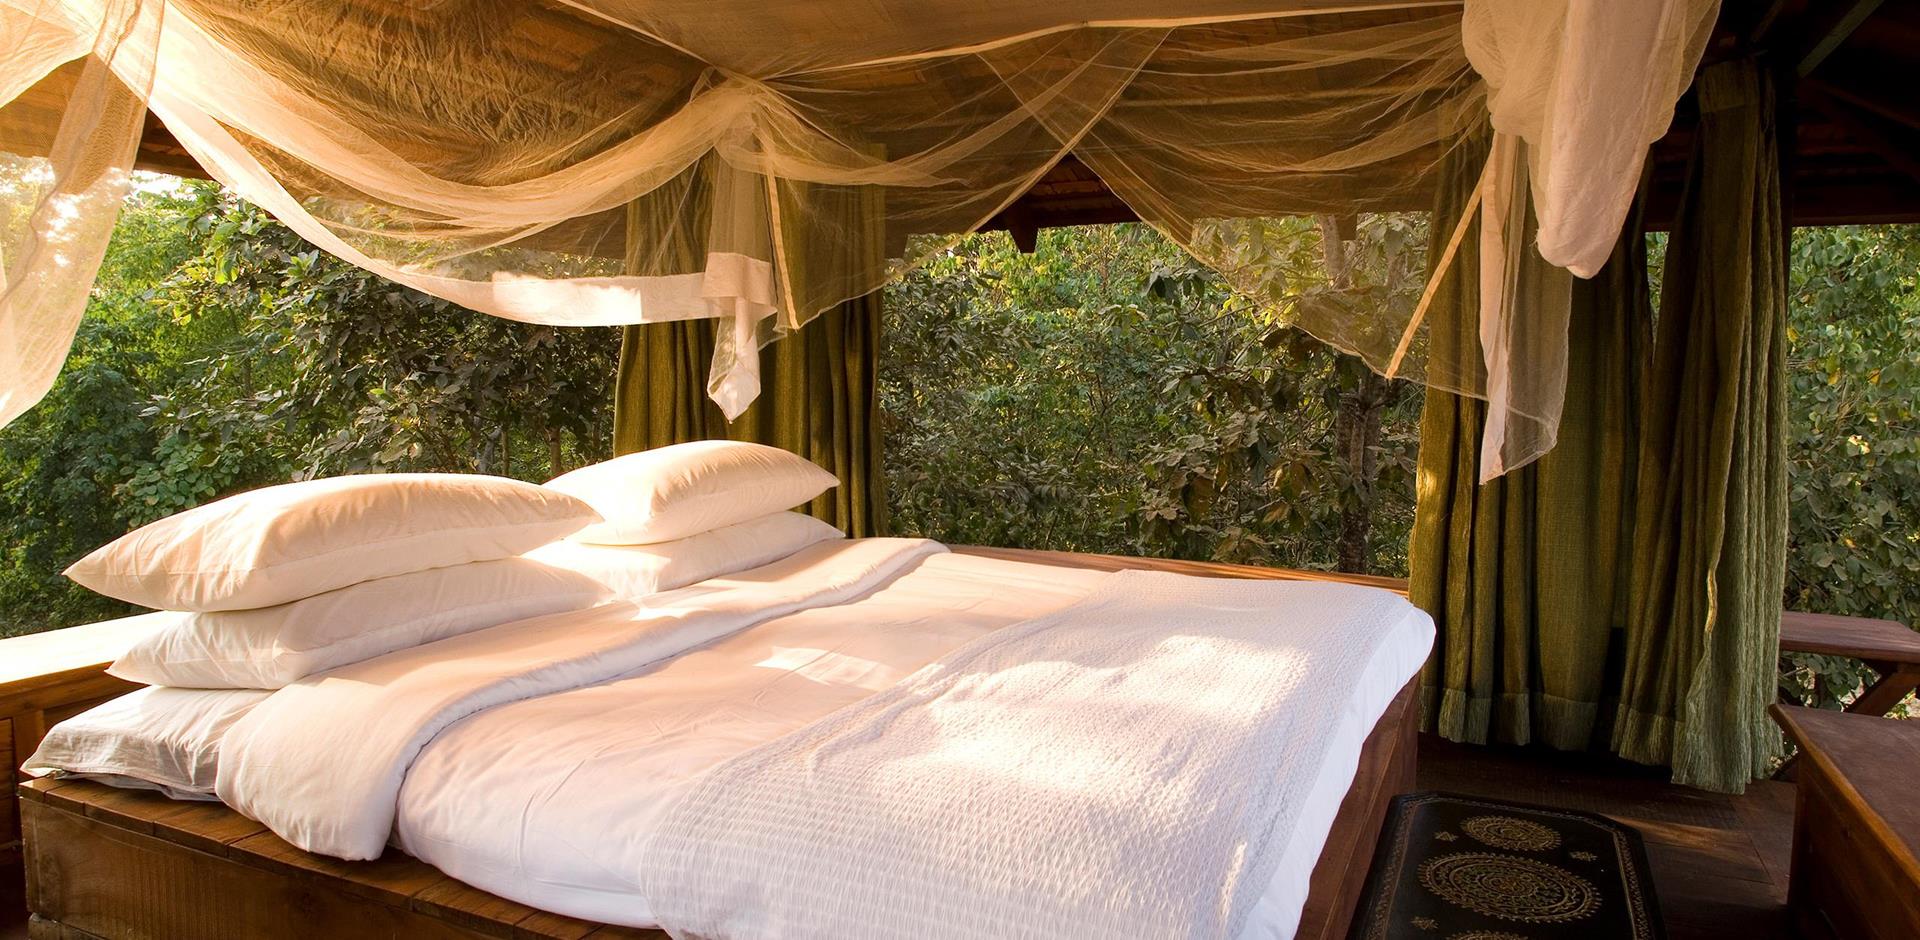 Outdoor bed, Baghvan, Pench National Park, India